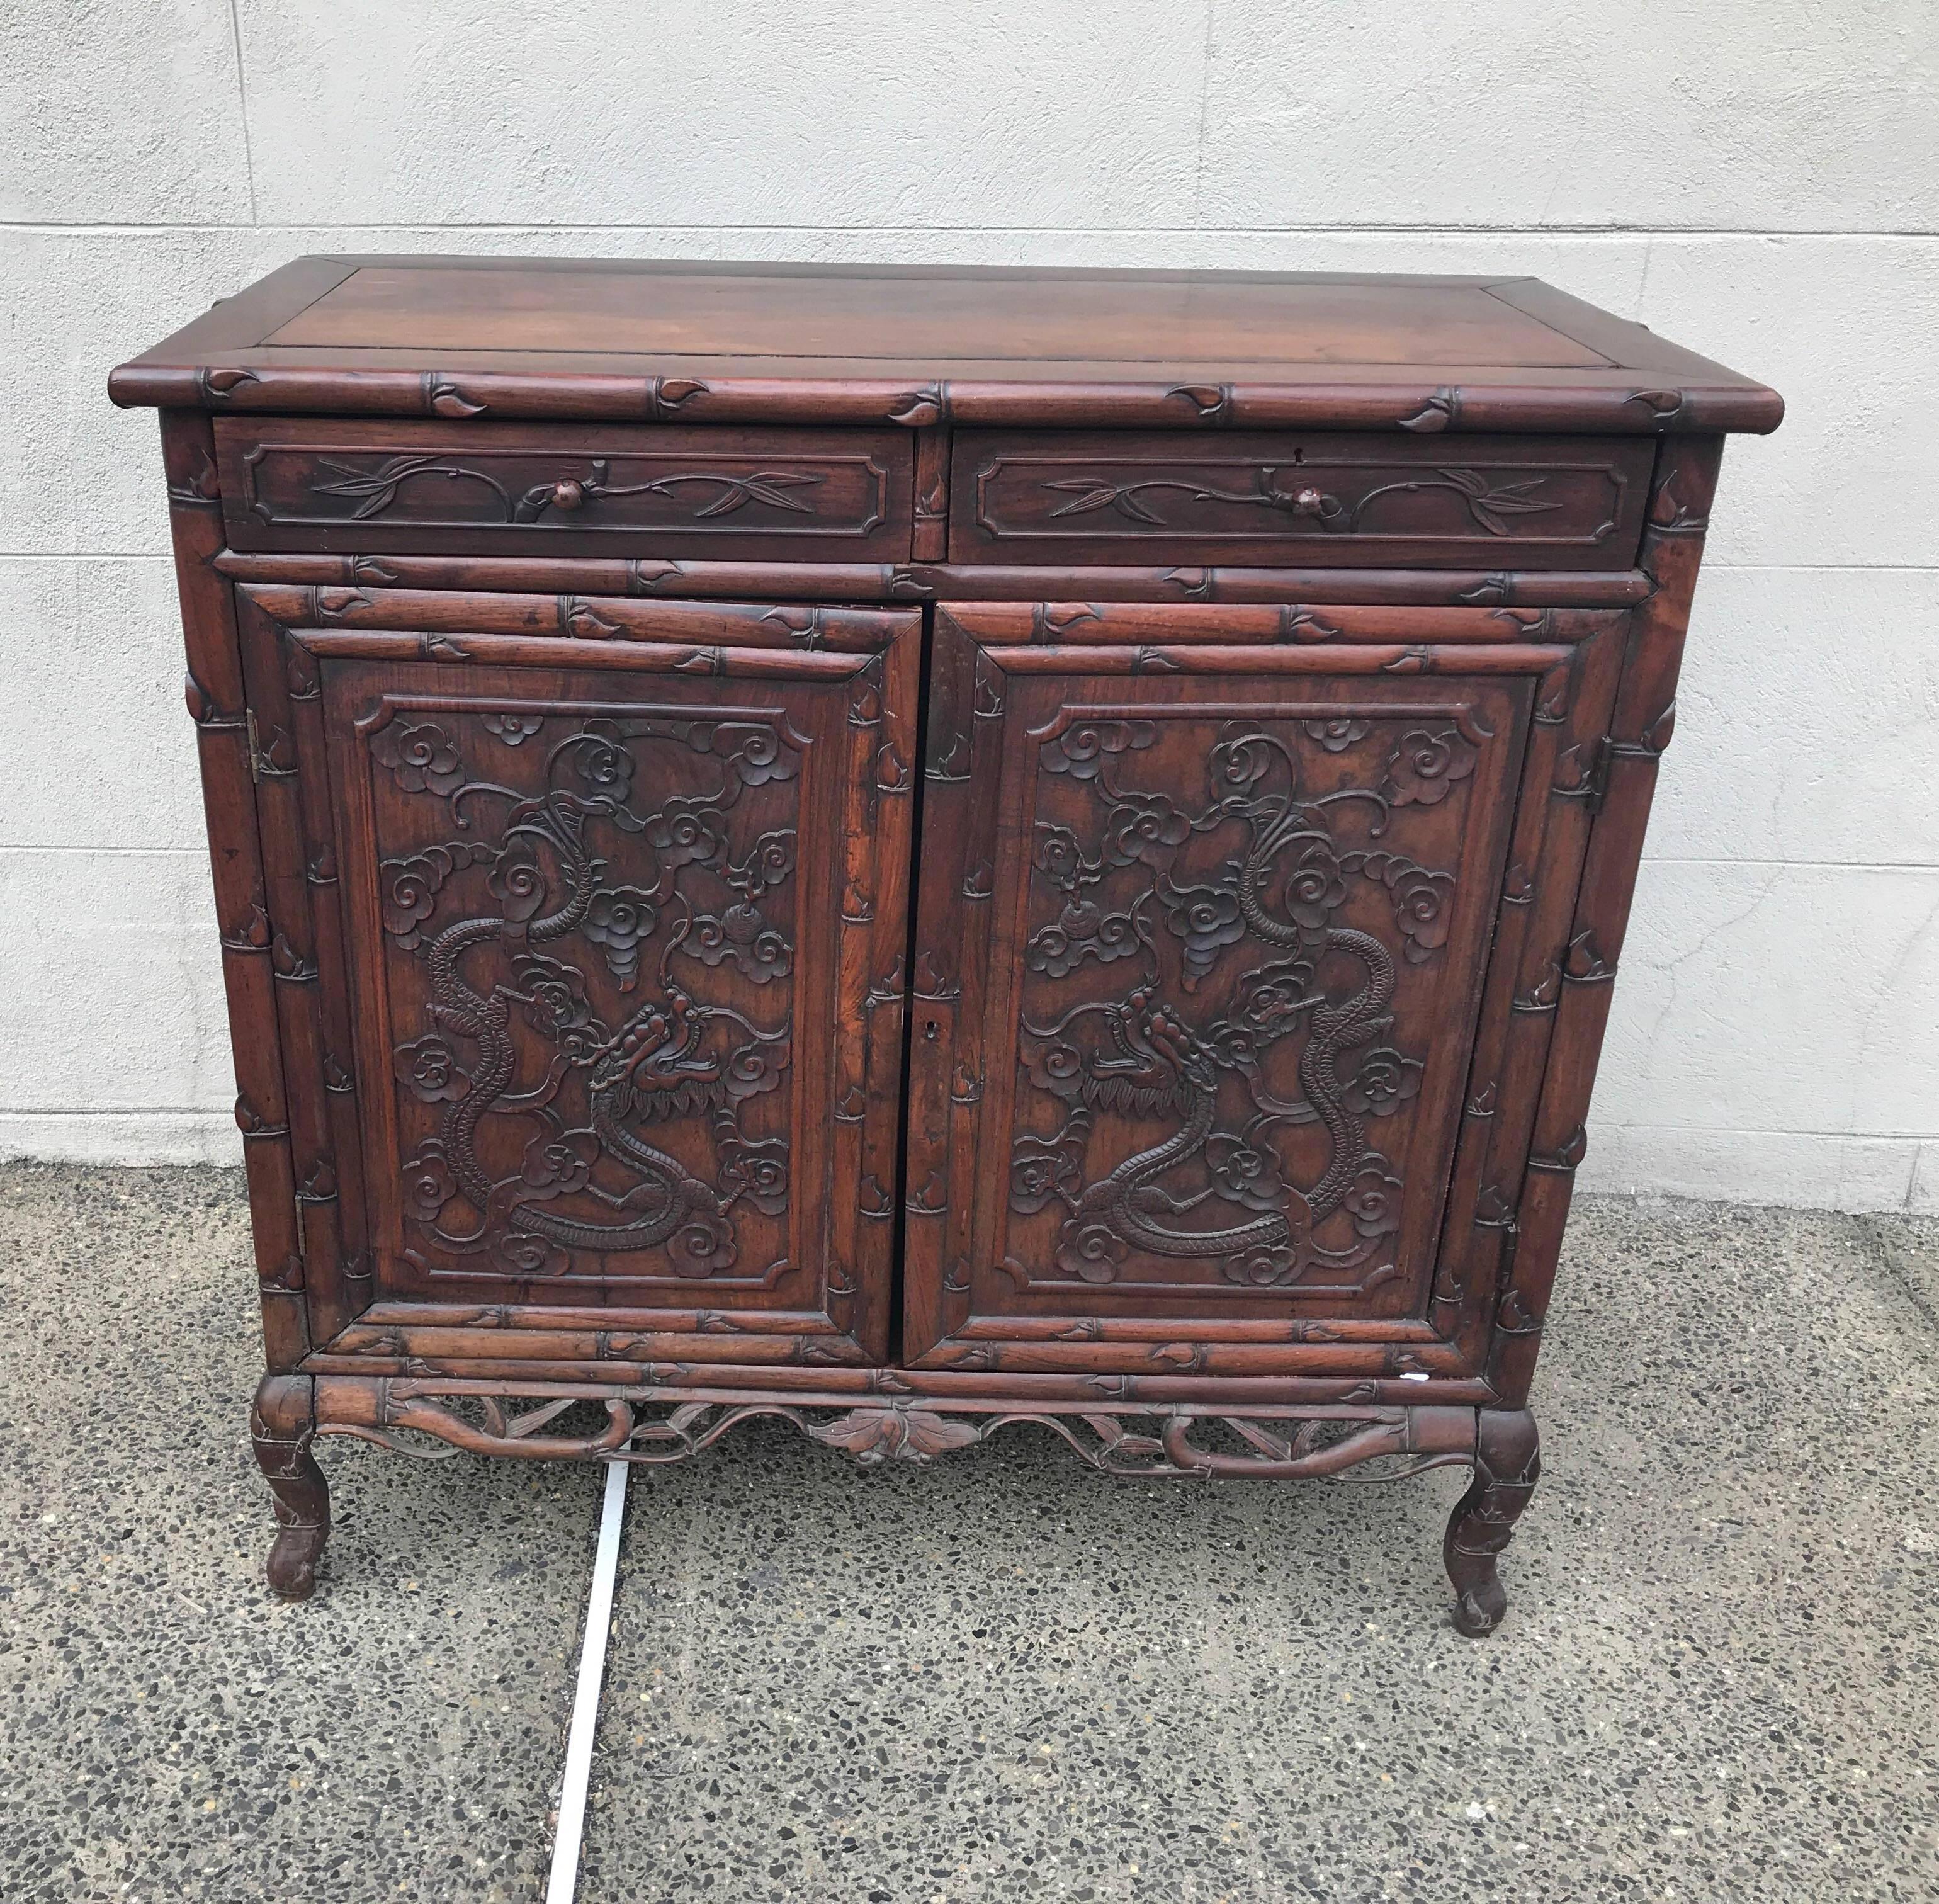 Hand-carved 19th century rosewood cabinet. Exceptional relief carving with dragons and vine motif all around.